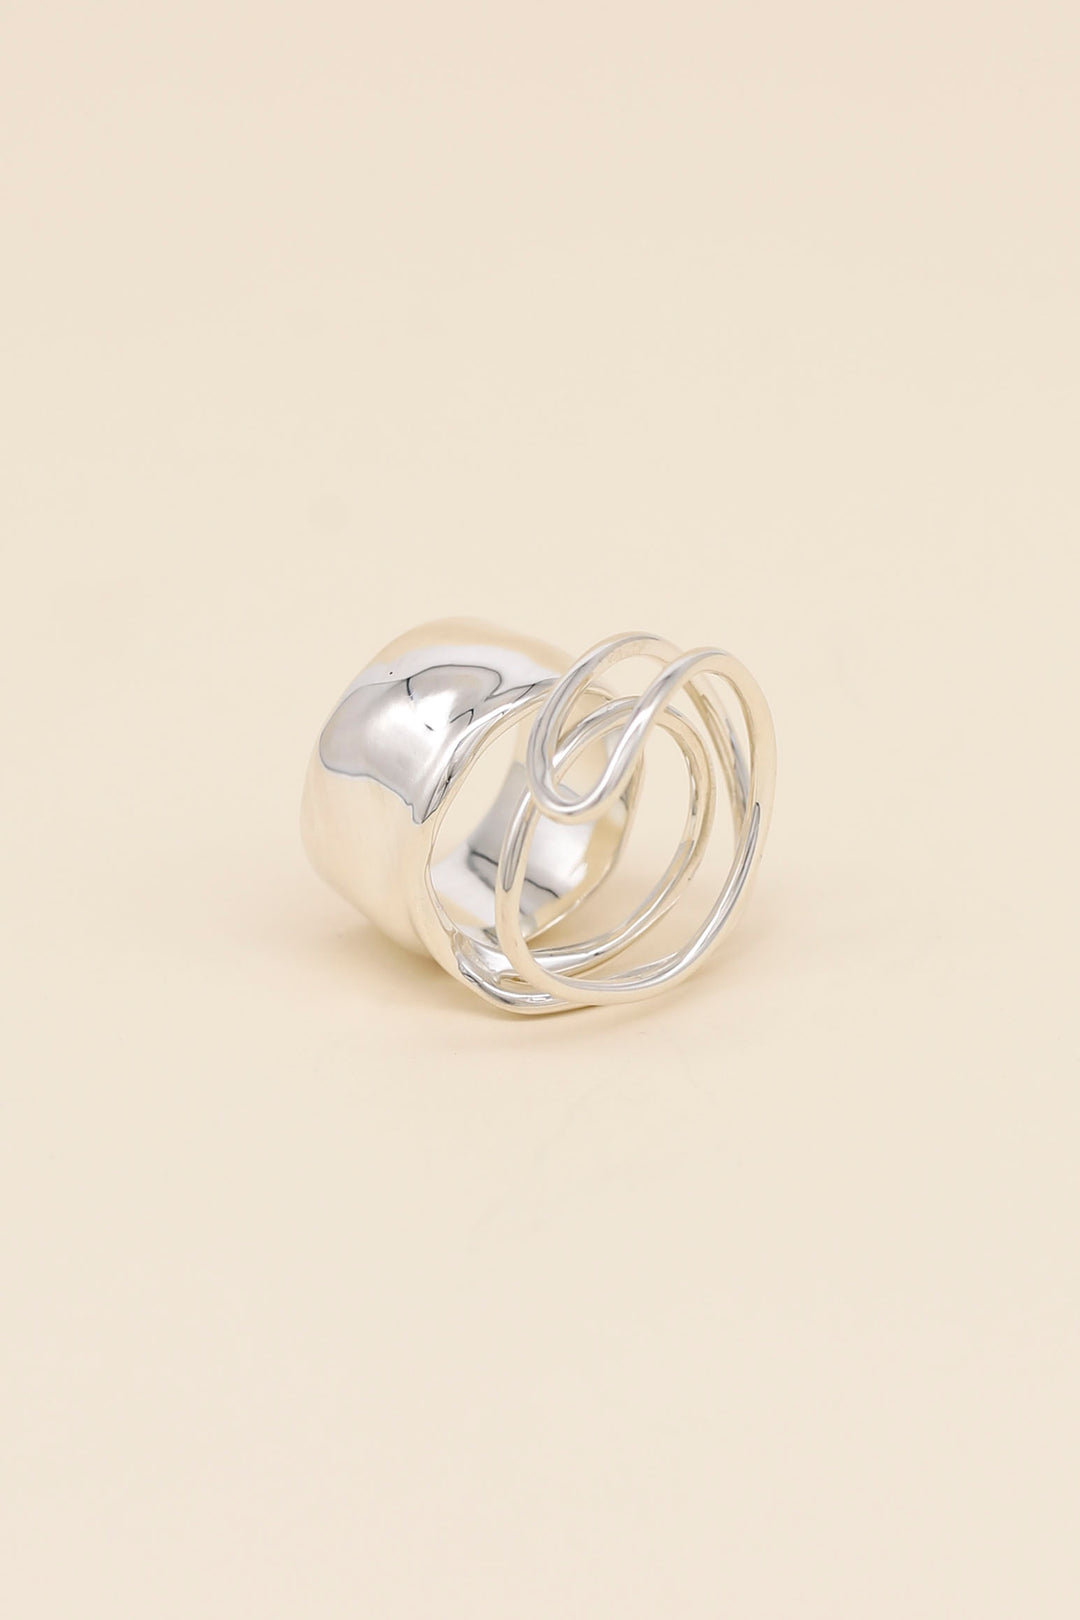 Sprout / SP-R08 / RING